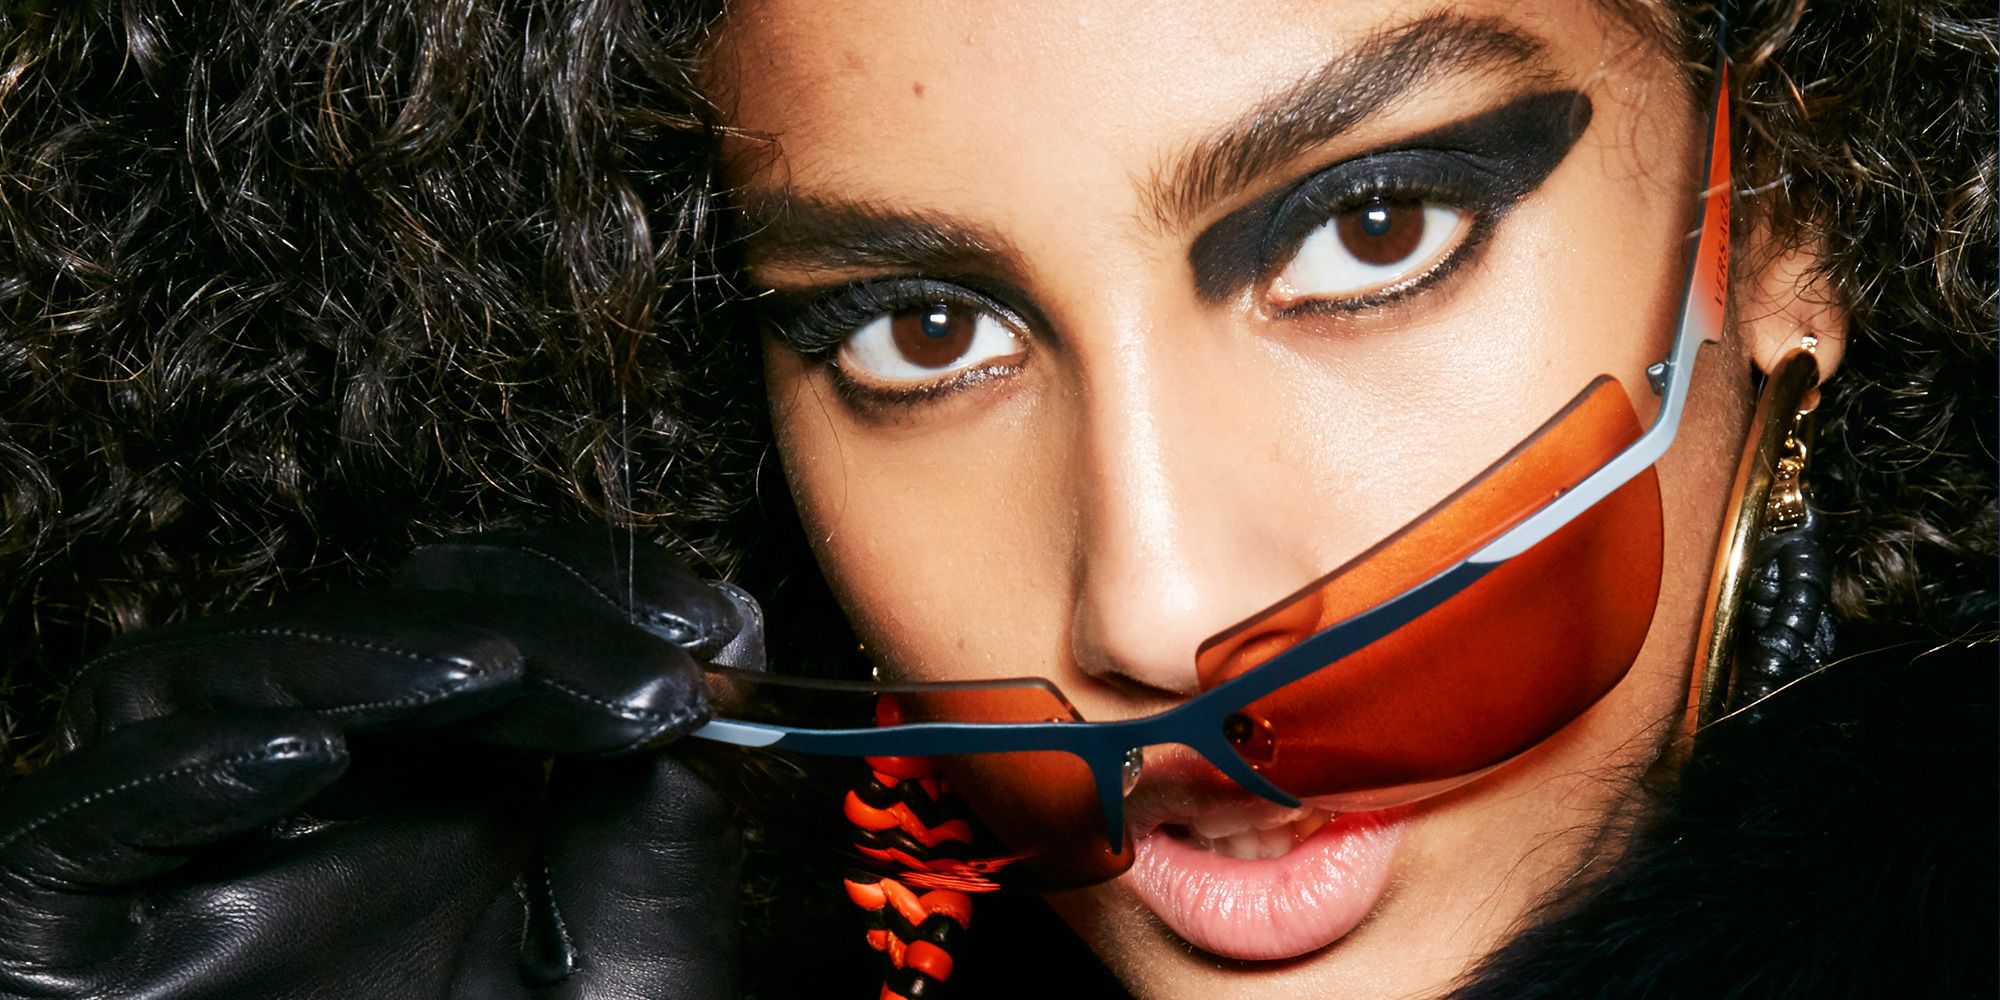 All Your Eyebrow Threading Questions Answered